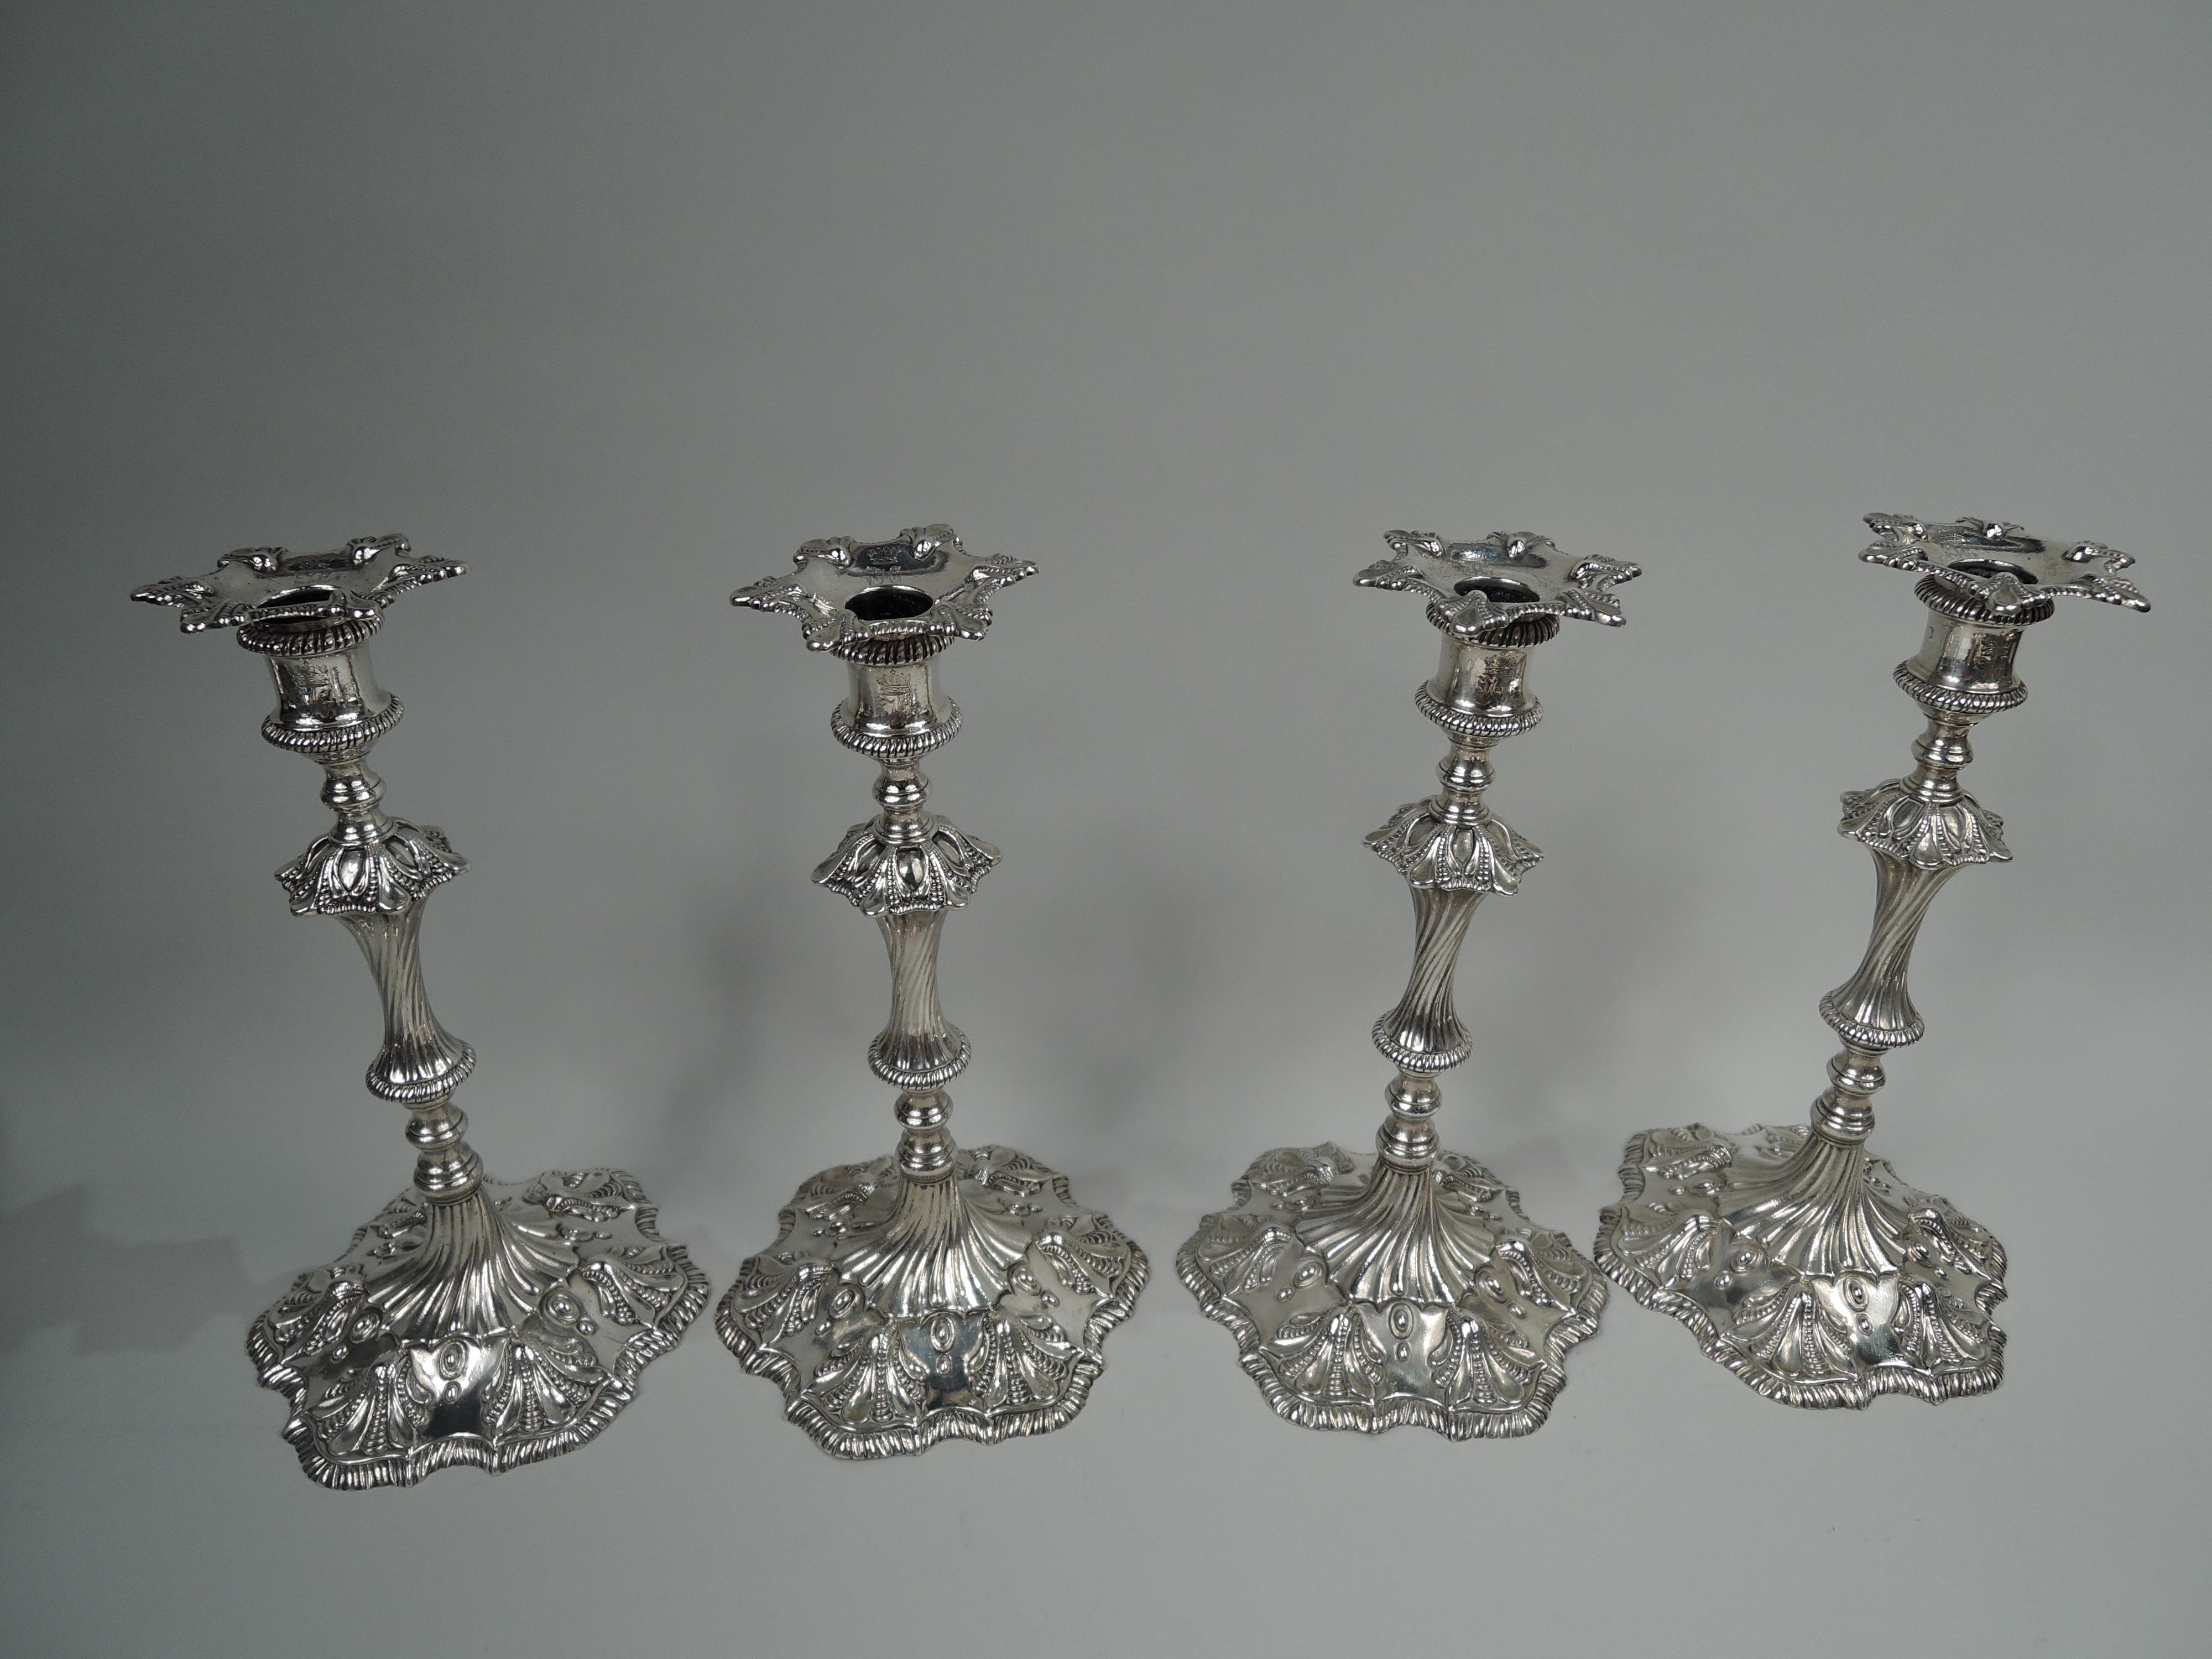 Set of 4 George III cast sterling silver candlesticks. Made by Richard Morson & Benjamin Stephenson in London in 1771. Each: Spool socket with detachable bobeche mounted to knopped and twisted shaft on raised and serpentine foot. Fluted and